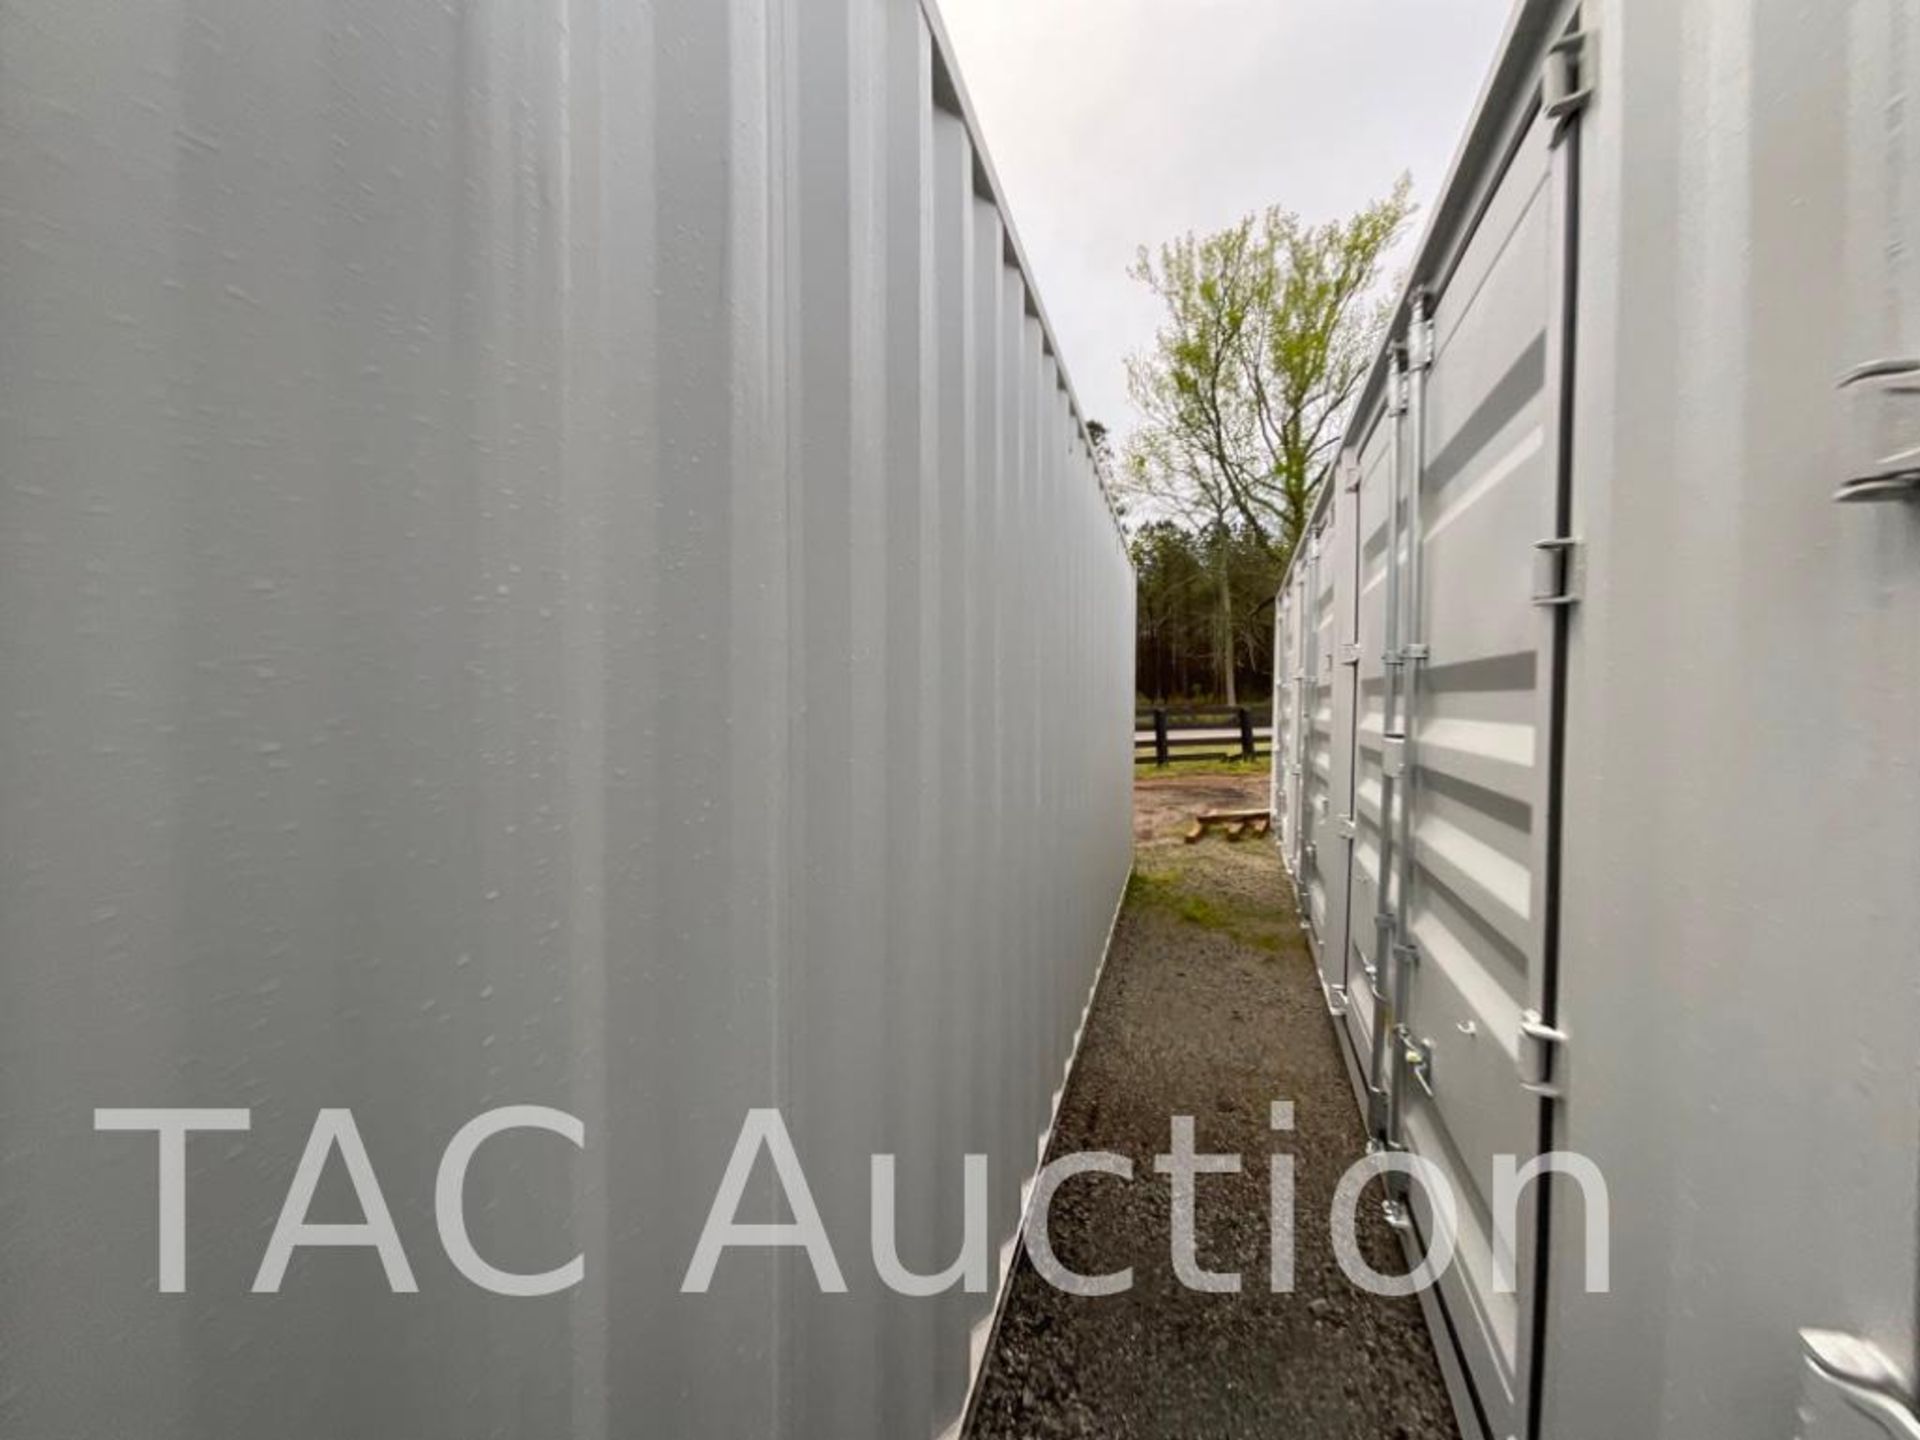 New 40ft Hi-Cube Shipping Container - Image 8 of 16